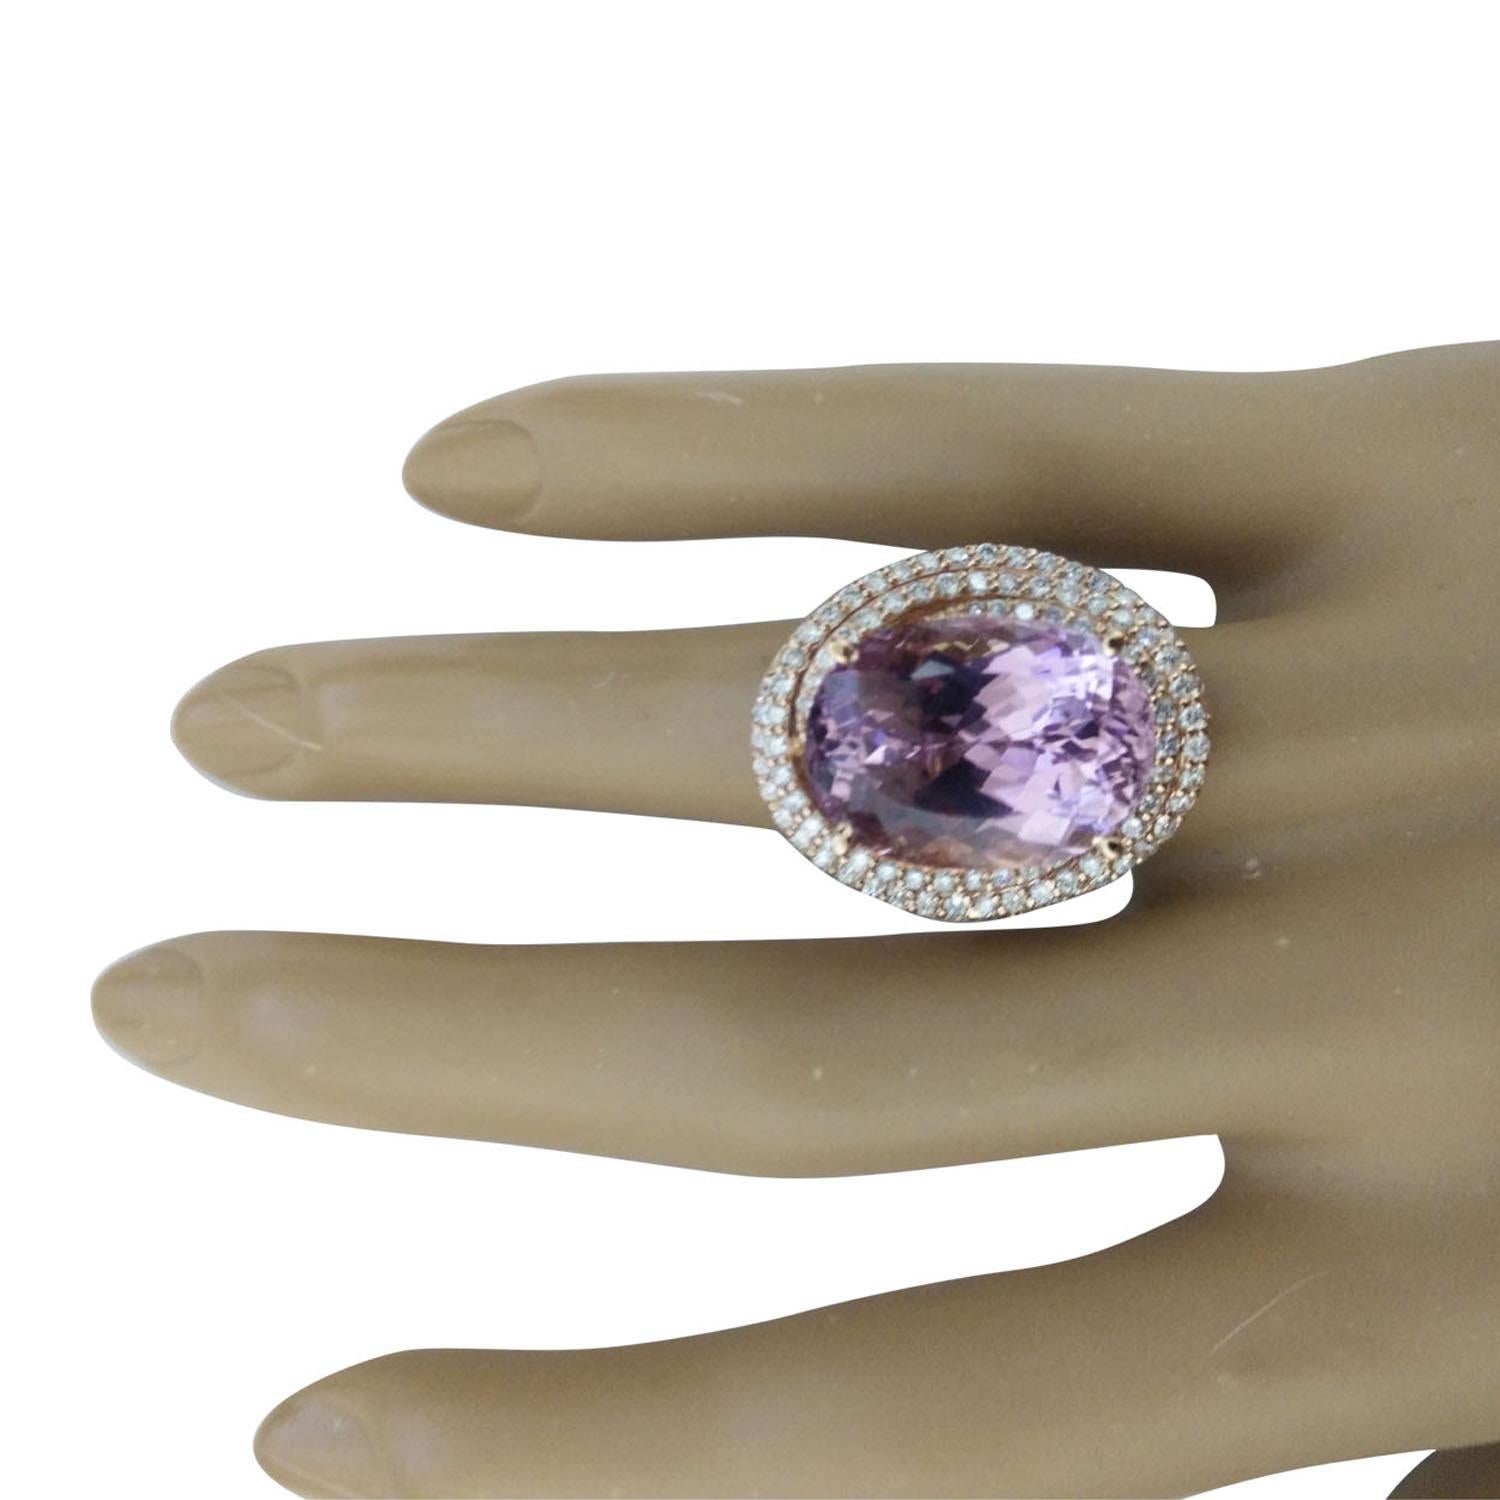 19.30 Carat Natural Kunzite 14 Karat Solid Rose Gold Diamond Ring
Stamped: 14K 
Ring Size: 7 
Total Ring Weight: 9.4 Grams
Kunzite Weight: 18.50 Carat (18.00x13.00 Millimeter) 
Diamond Weight: 1.20 Carat (F-G Color, VS2-SI1 Clarity)
Face Measures: